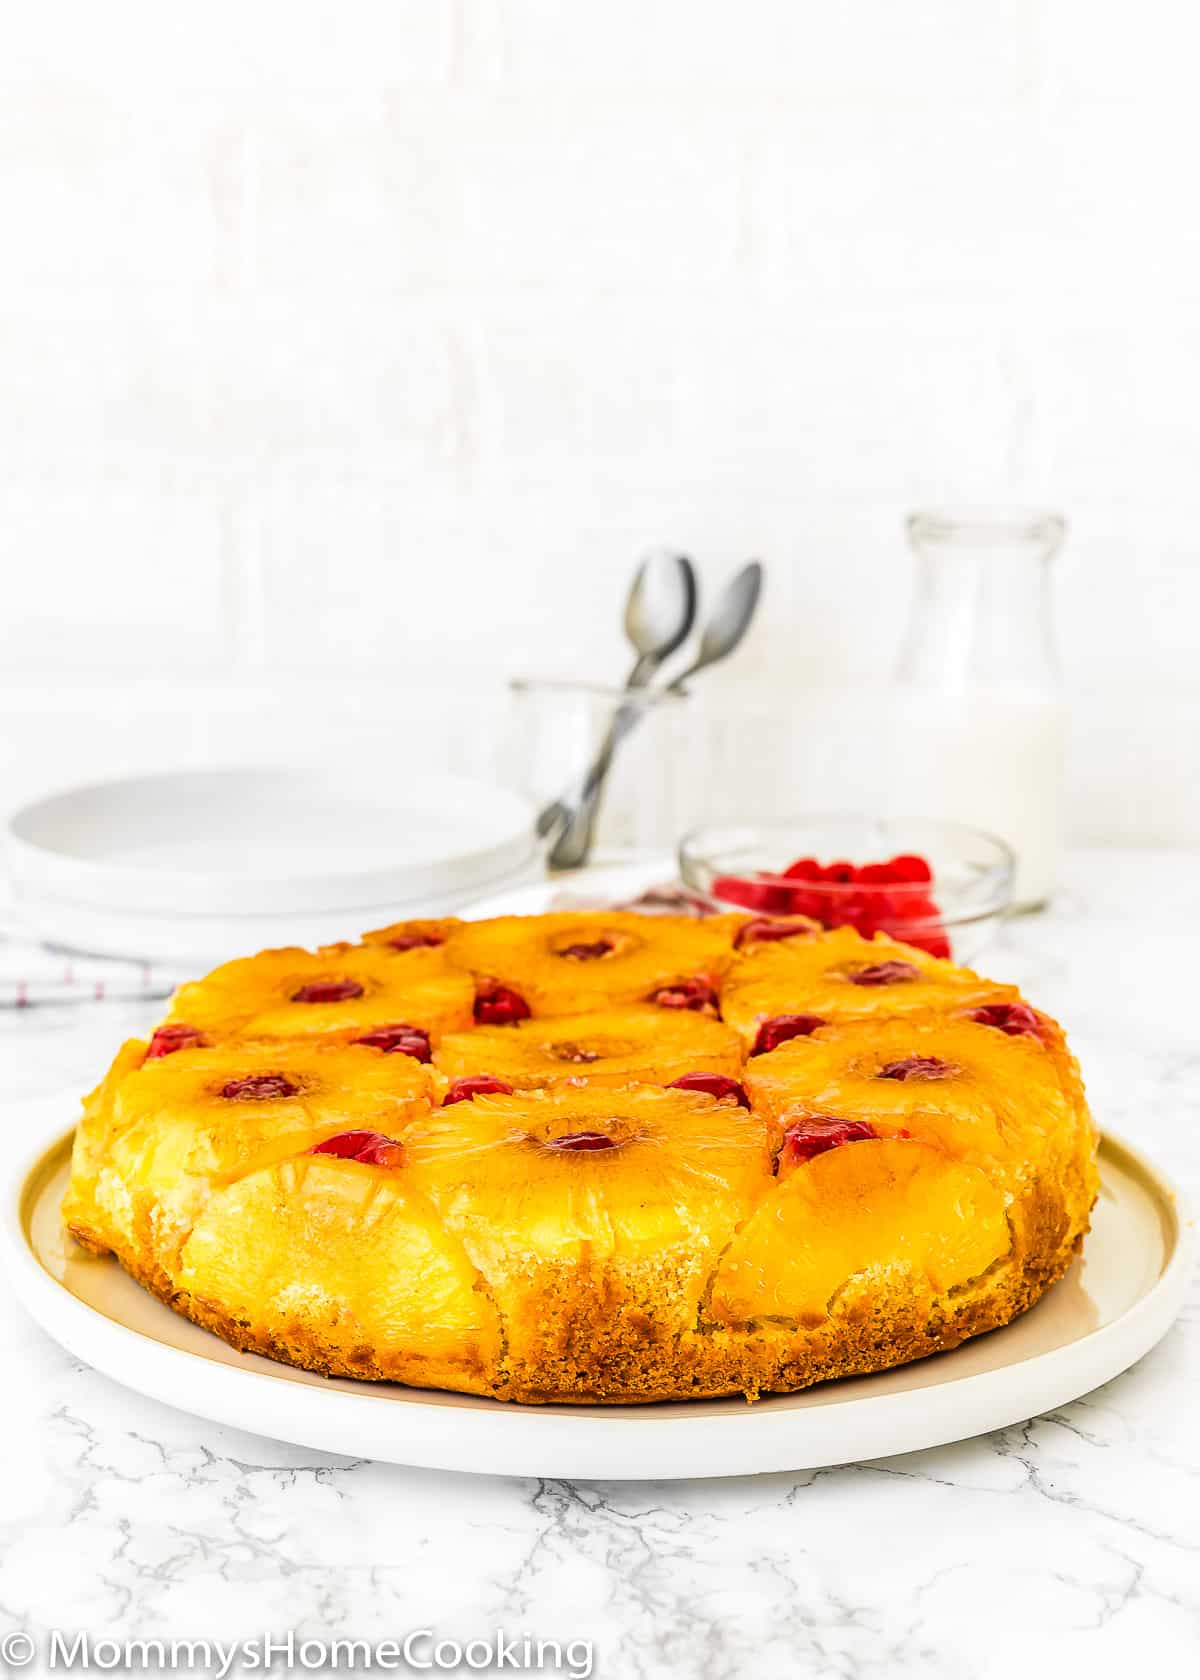 whole Eggless Pineapple Upside Down Cake on a plate over a marble surface.